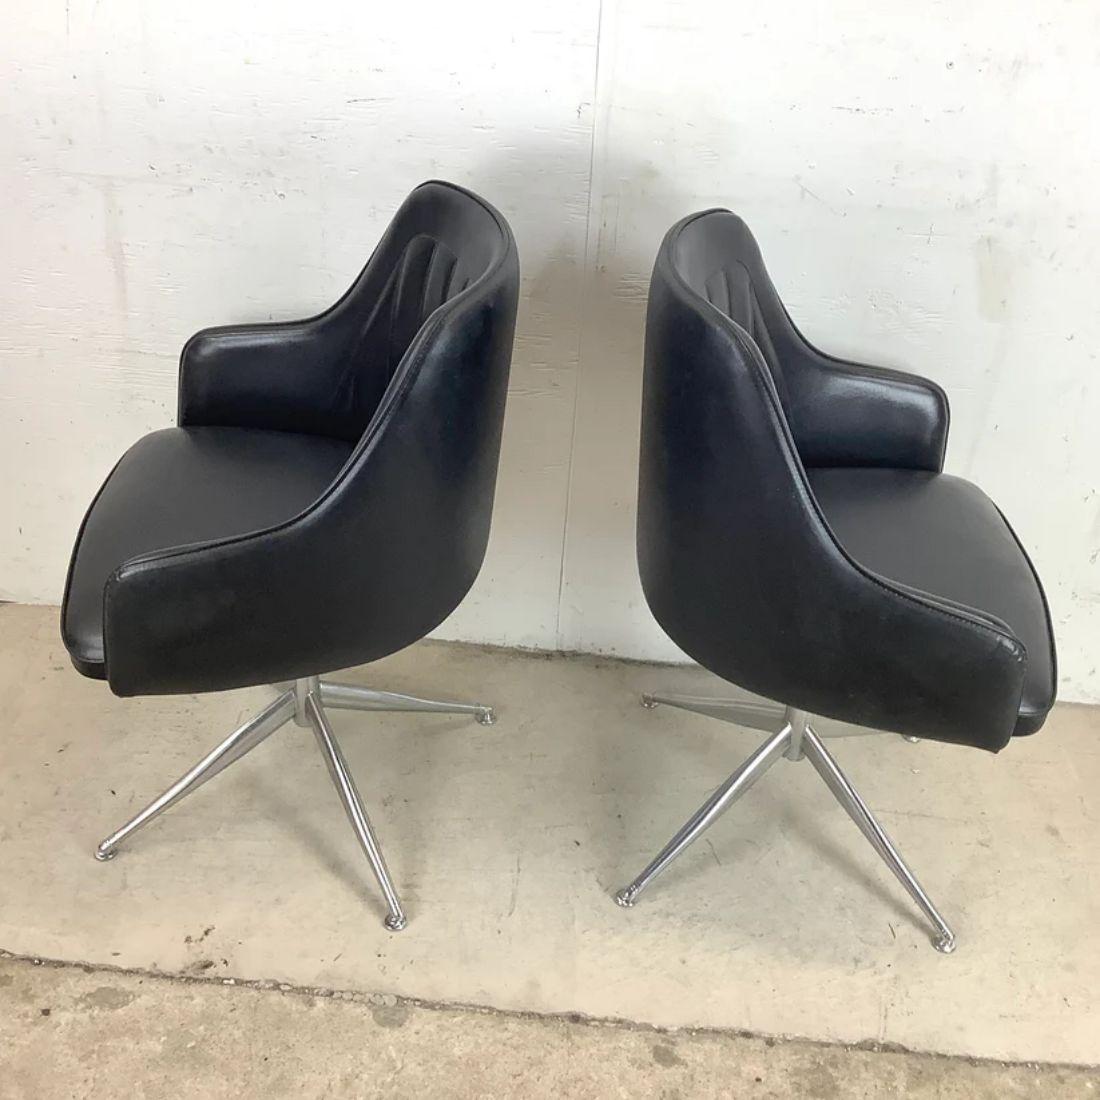 This stylish pair of midcentury swivel chairs feature unique Viko Baumritter style atomic design. The rounded seat backs fit the back comfortable while the striking four point steel bases feature tapered legs adding to the retro style of the